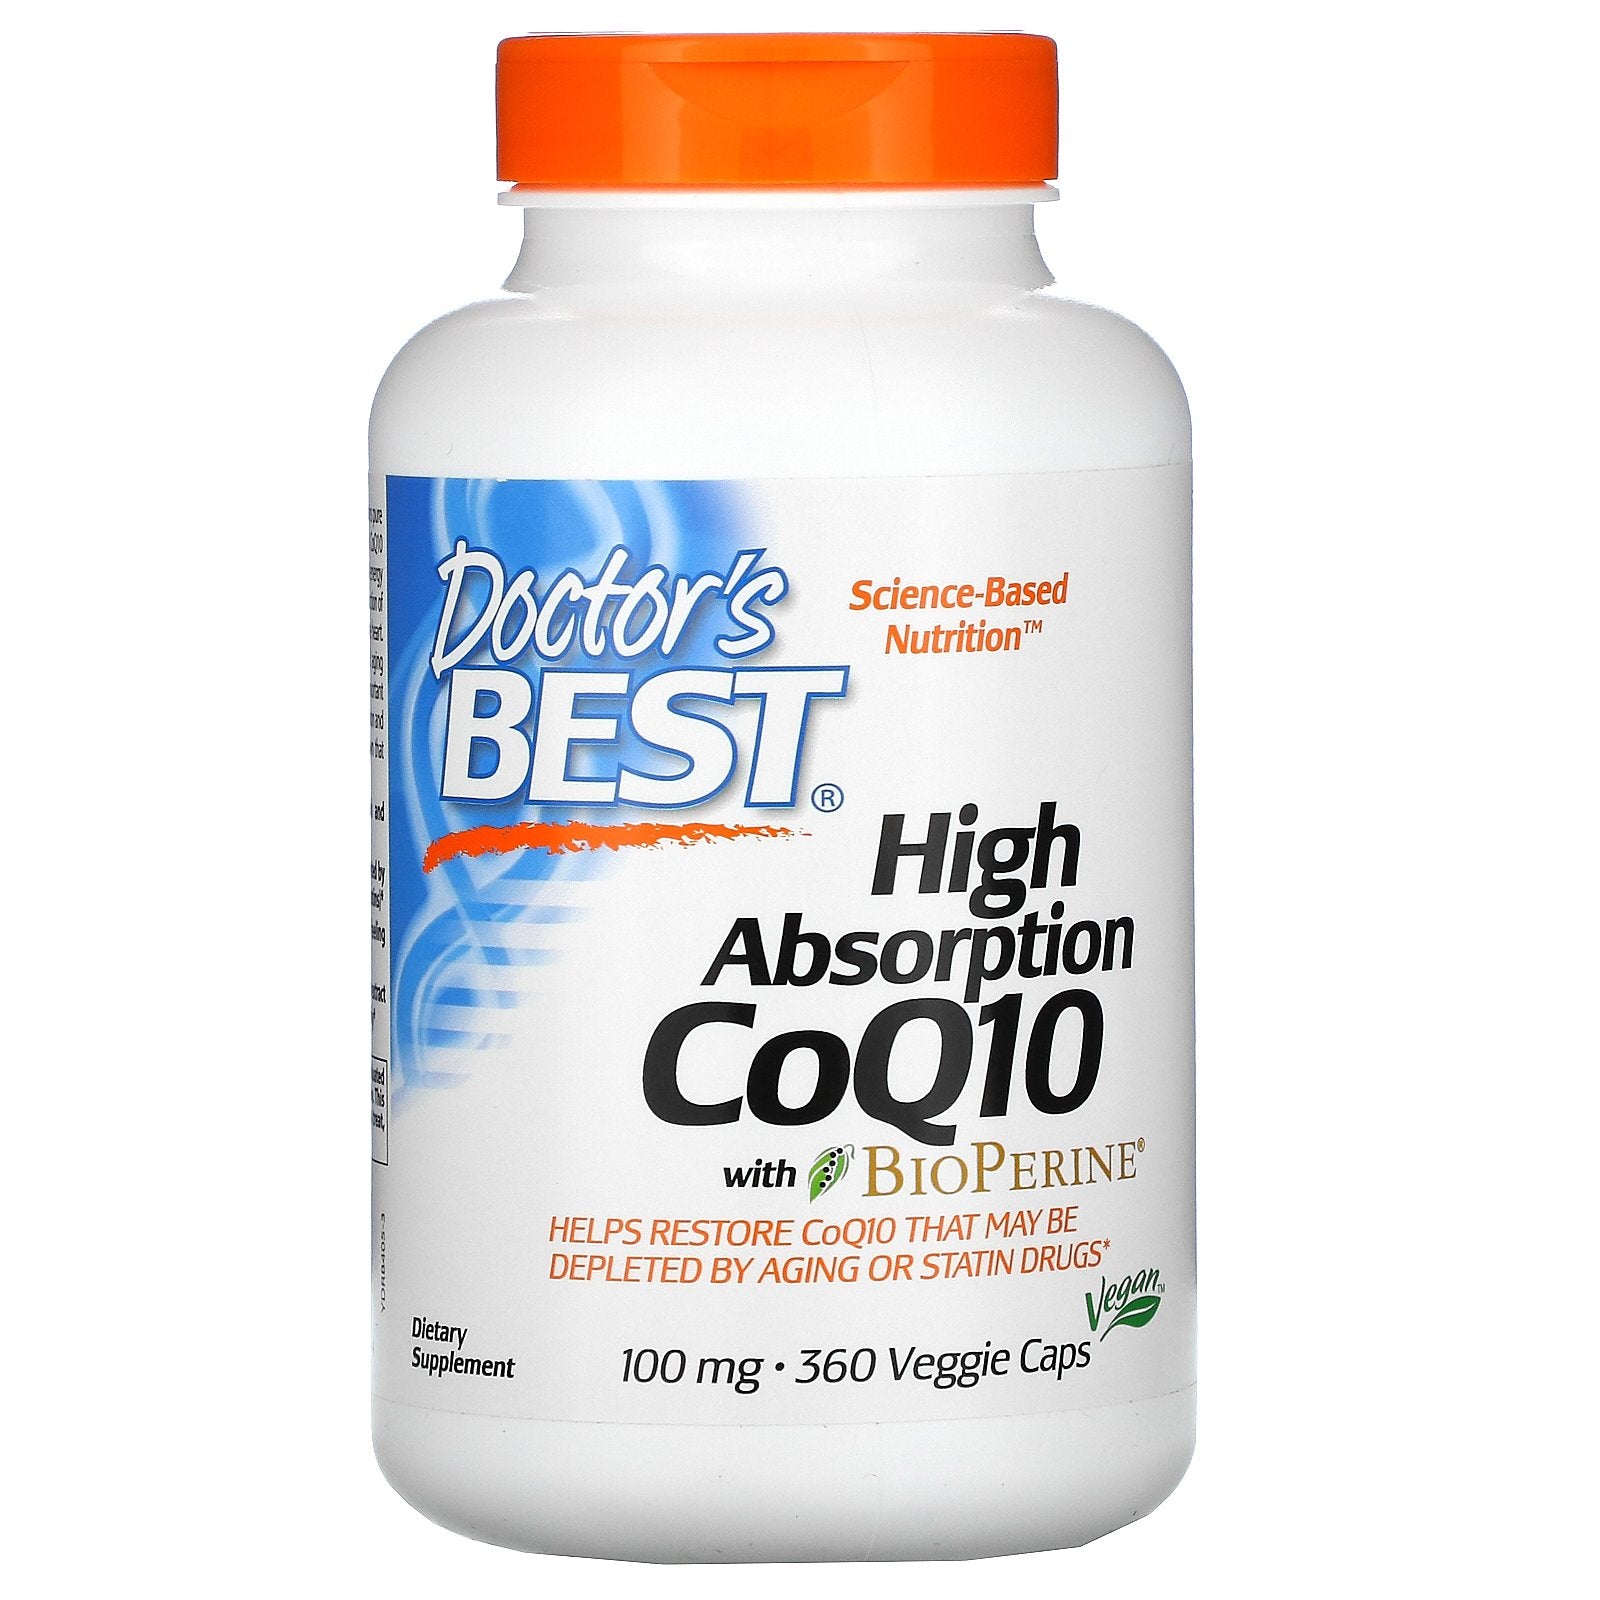 Doctor's Best, High Absorption CoQ10 with BioPerine, 100 mg, 360 Veggie Caps